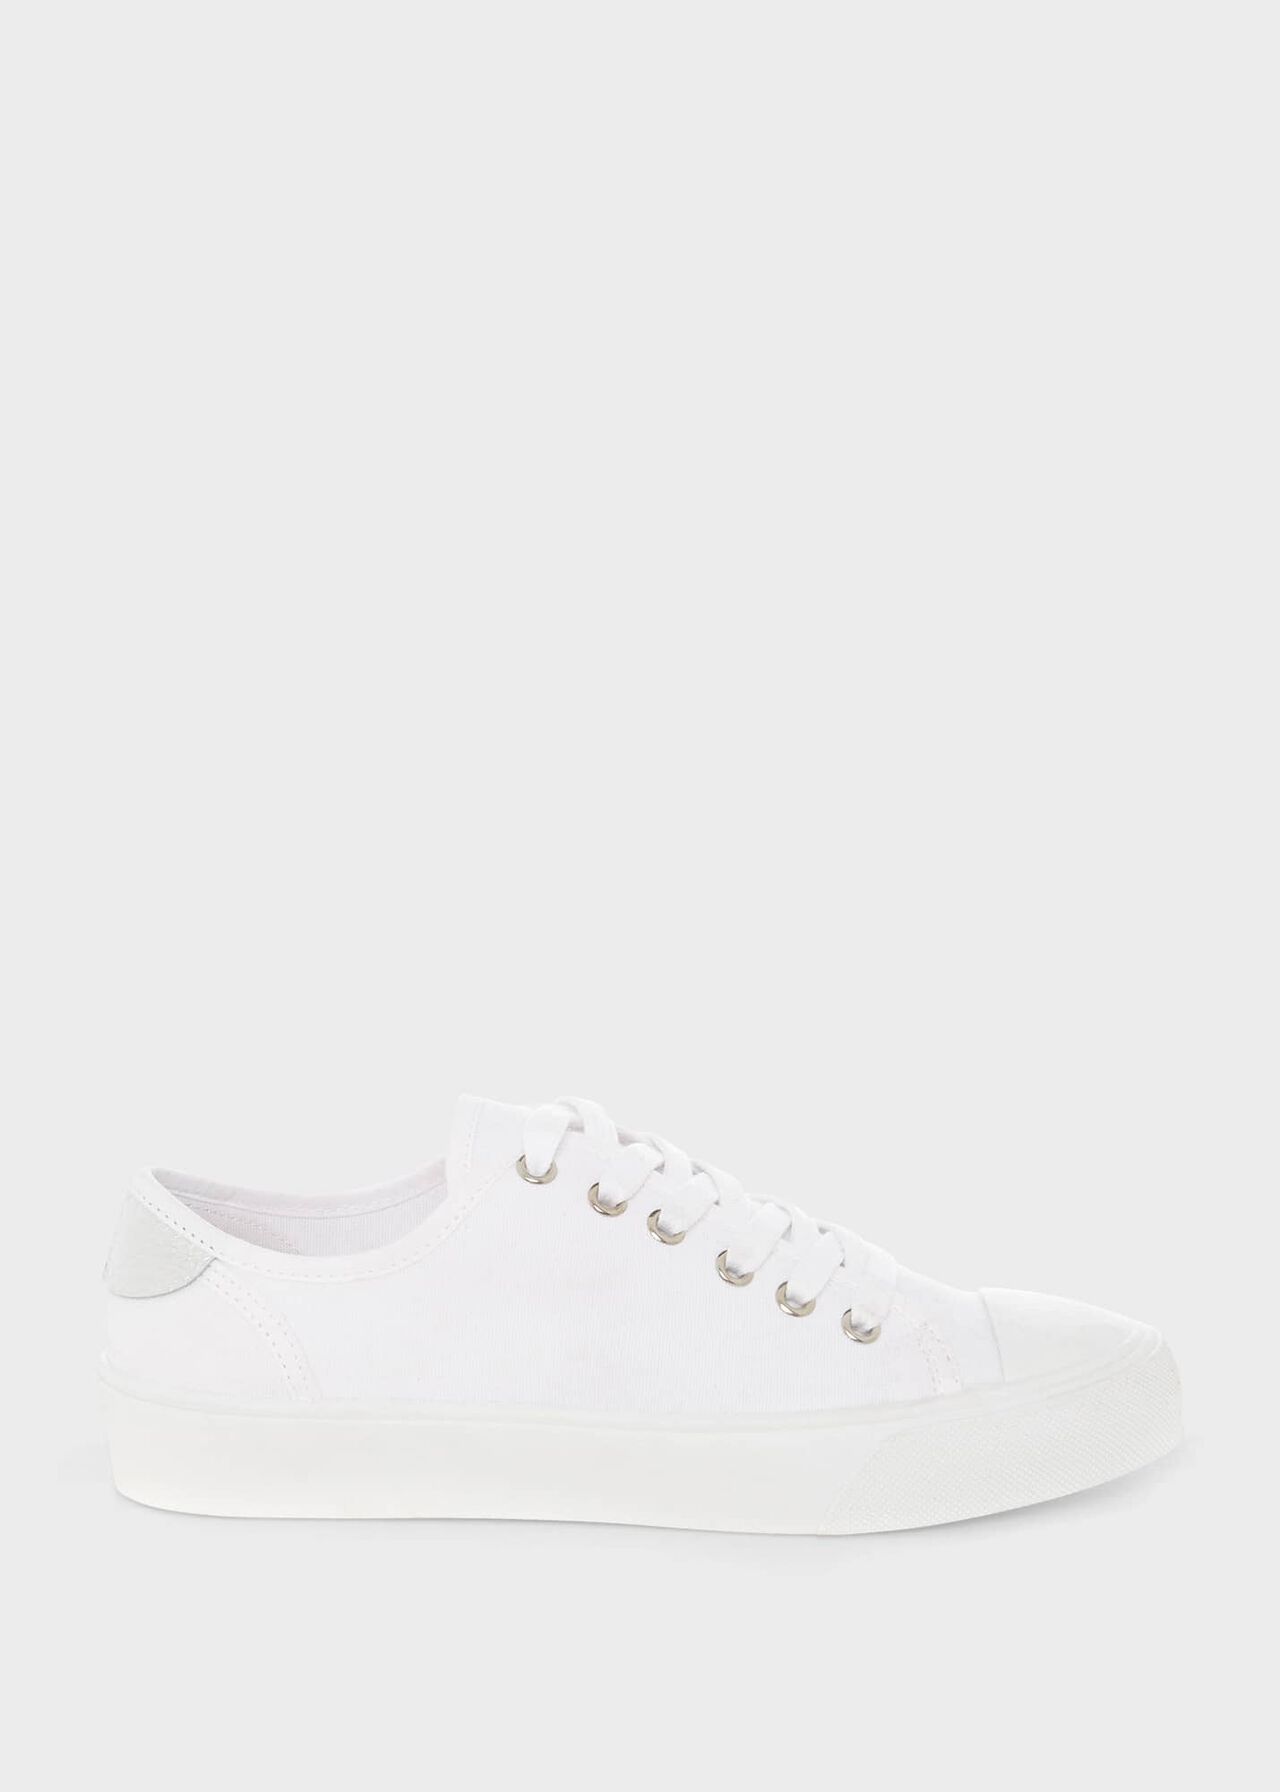 Bess Canvas Sneakers, White, hi-res